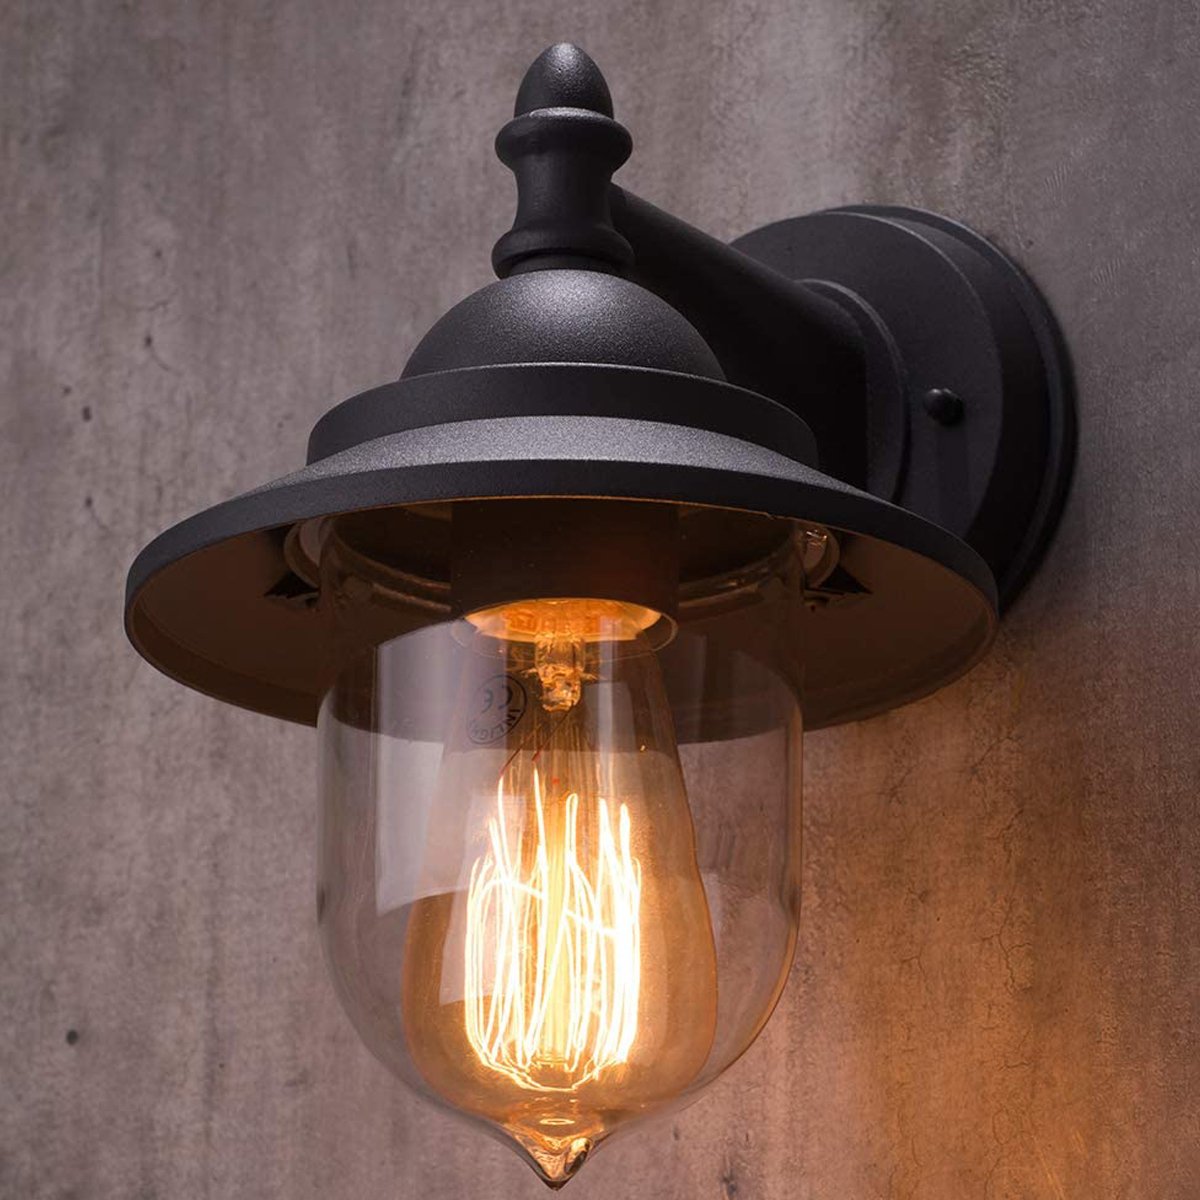 high-quality picture of matt black fisherman lantern wall light with lights turned on